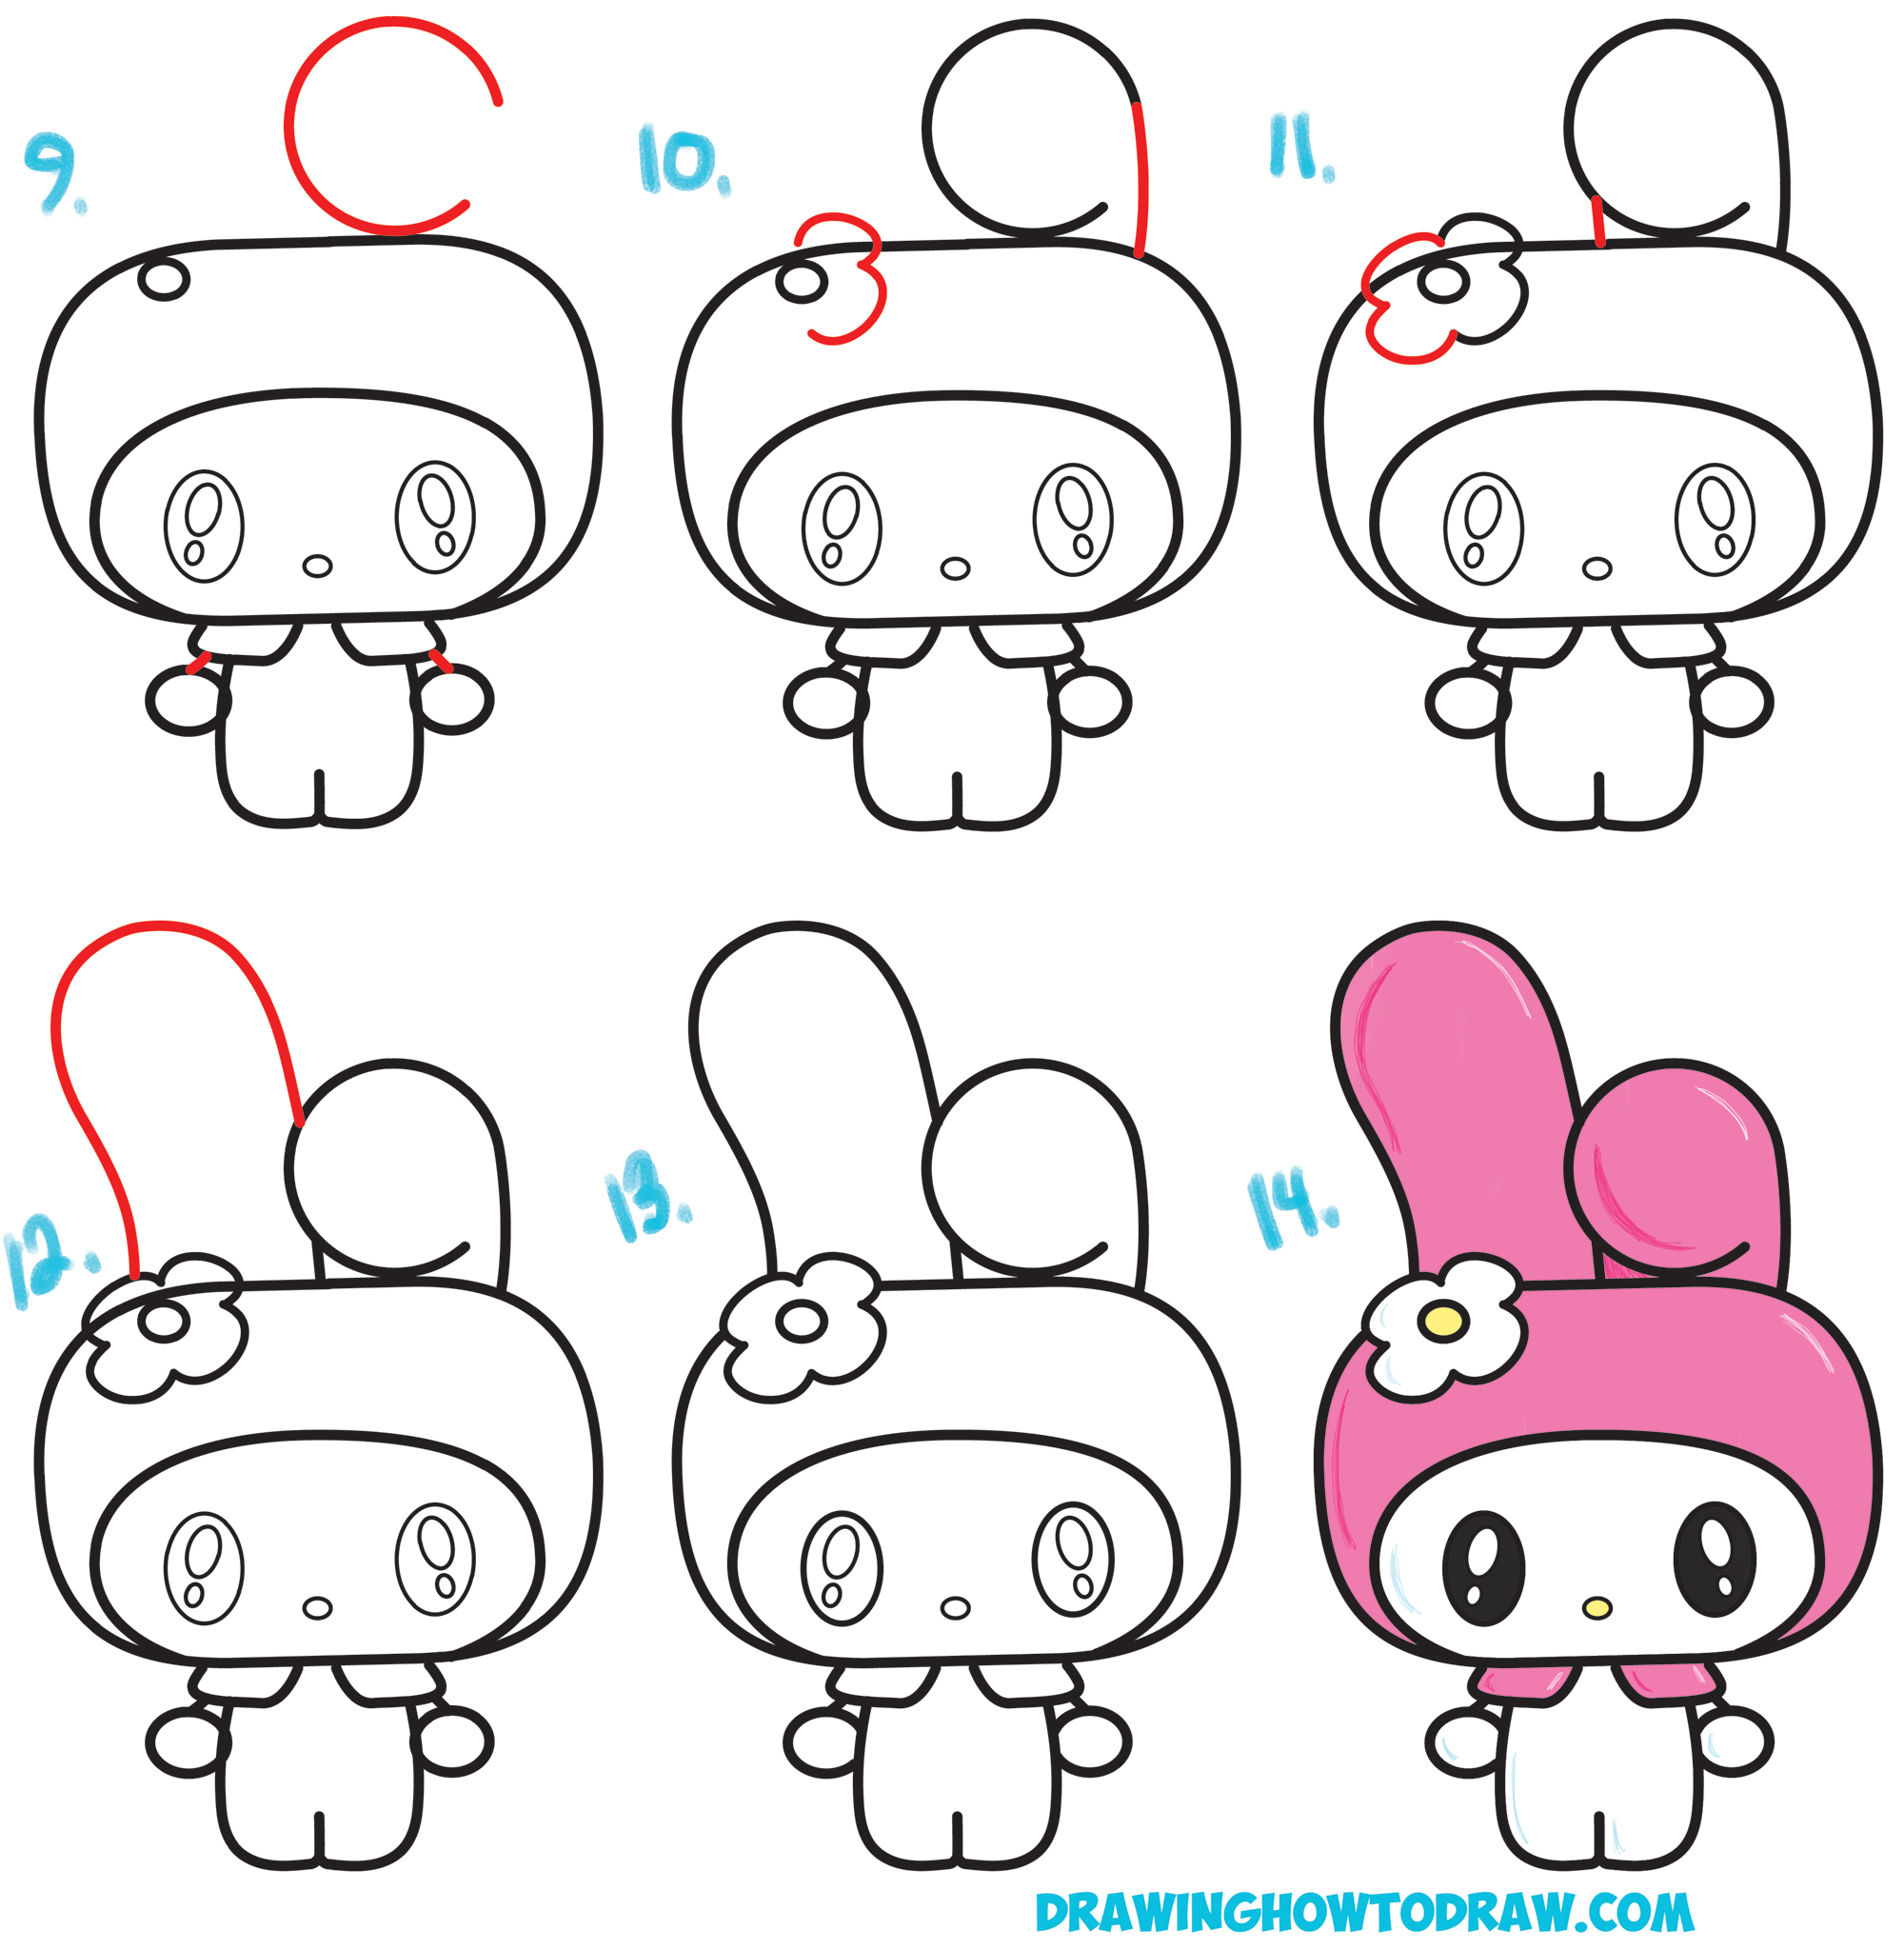 How to draw cute drawings